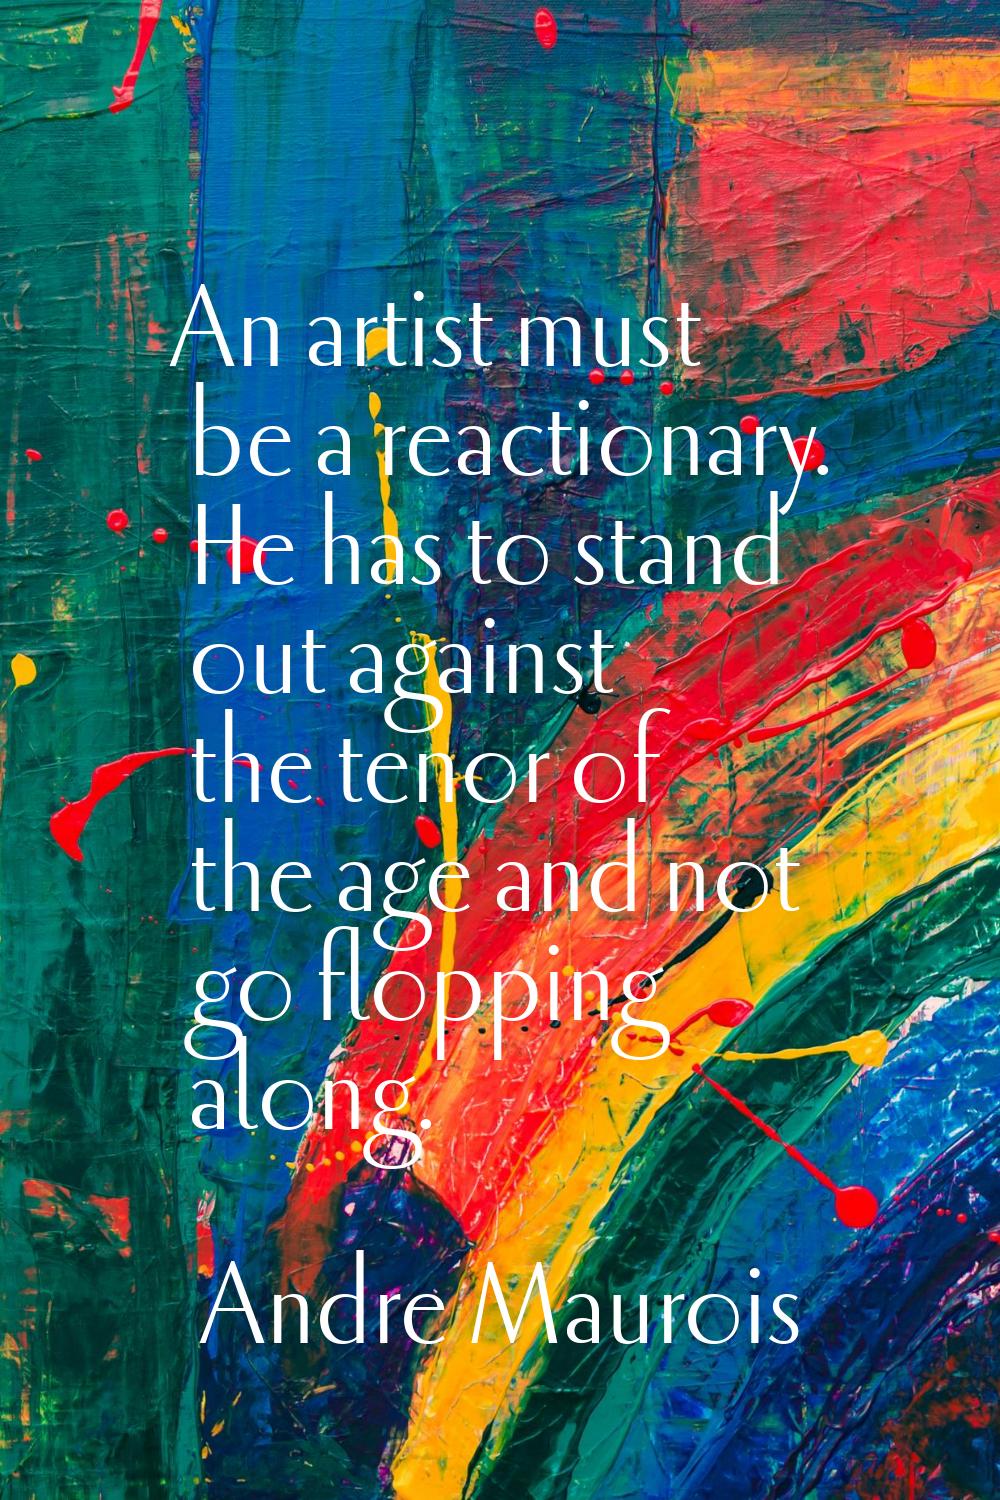 An artist must be a reactionary. He has to stand out against the tenor of the age and not go floppi